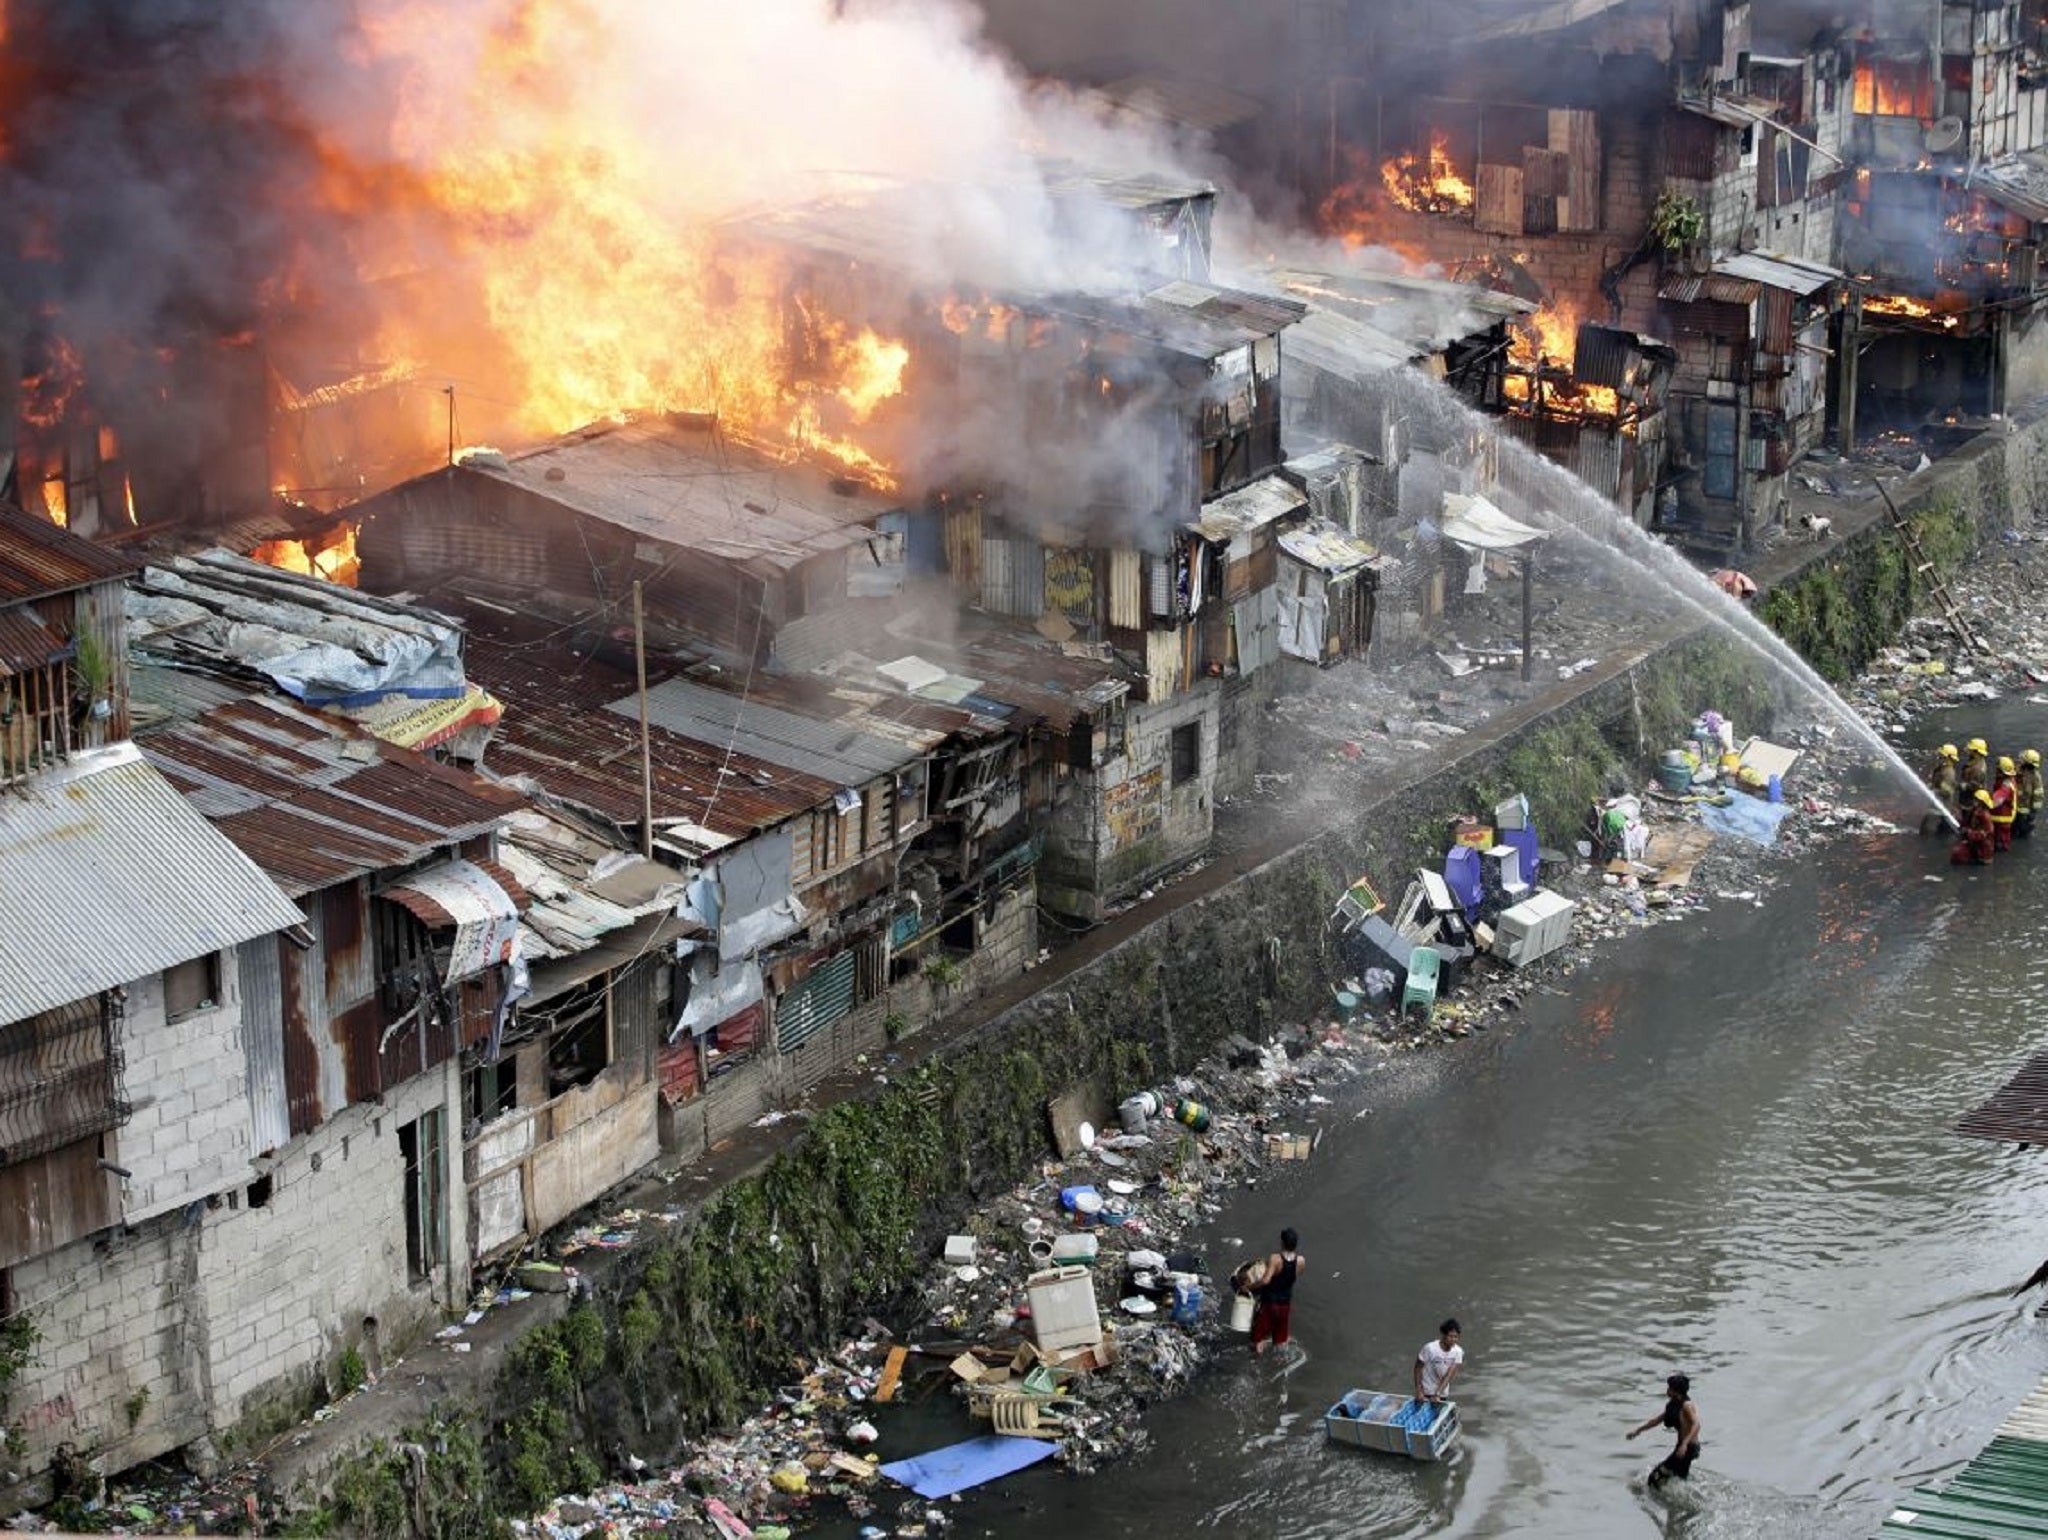 Firefighters battle the flames with hoses while standing in the creek in the Philippines